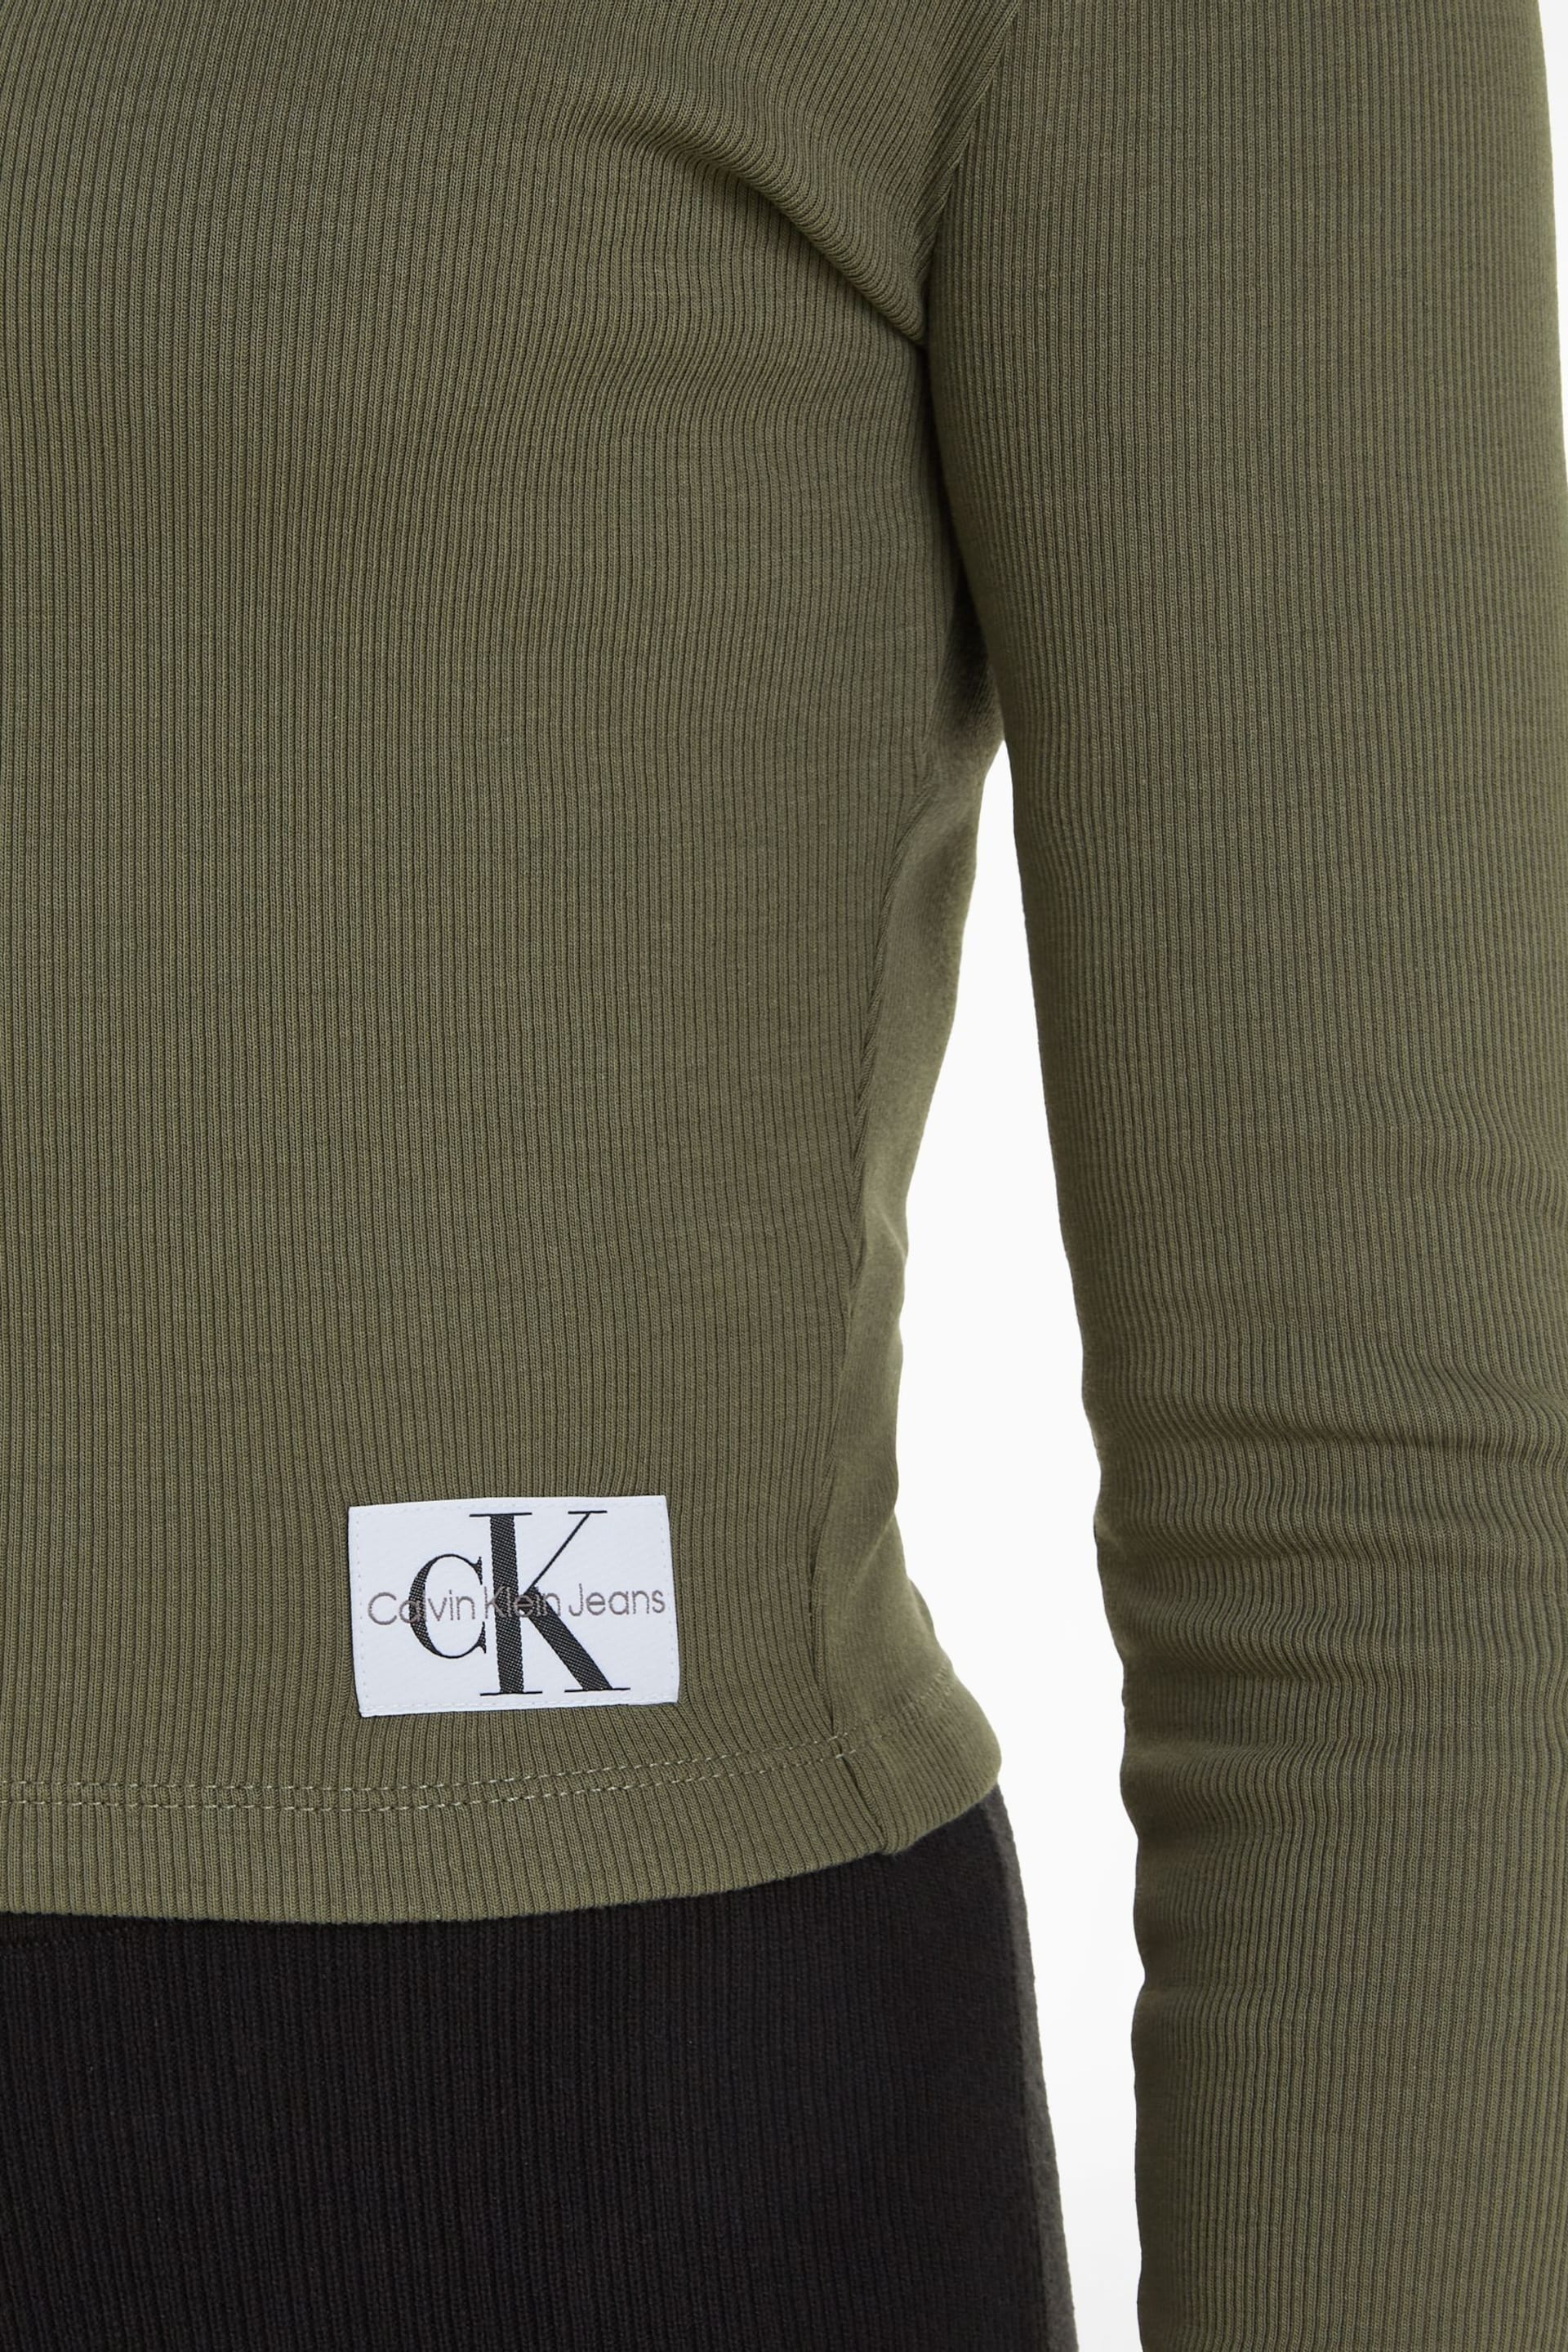 Calvin Klein Jeans Green Woven Label Cardigan - Image 5 of 6